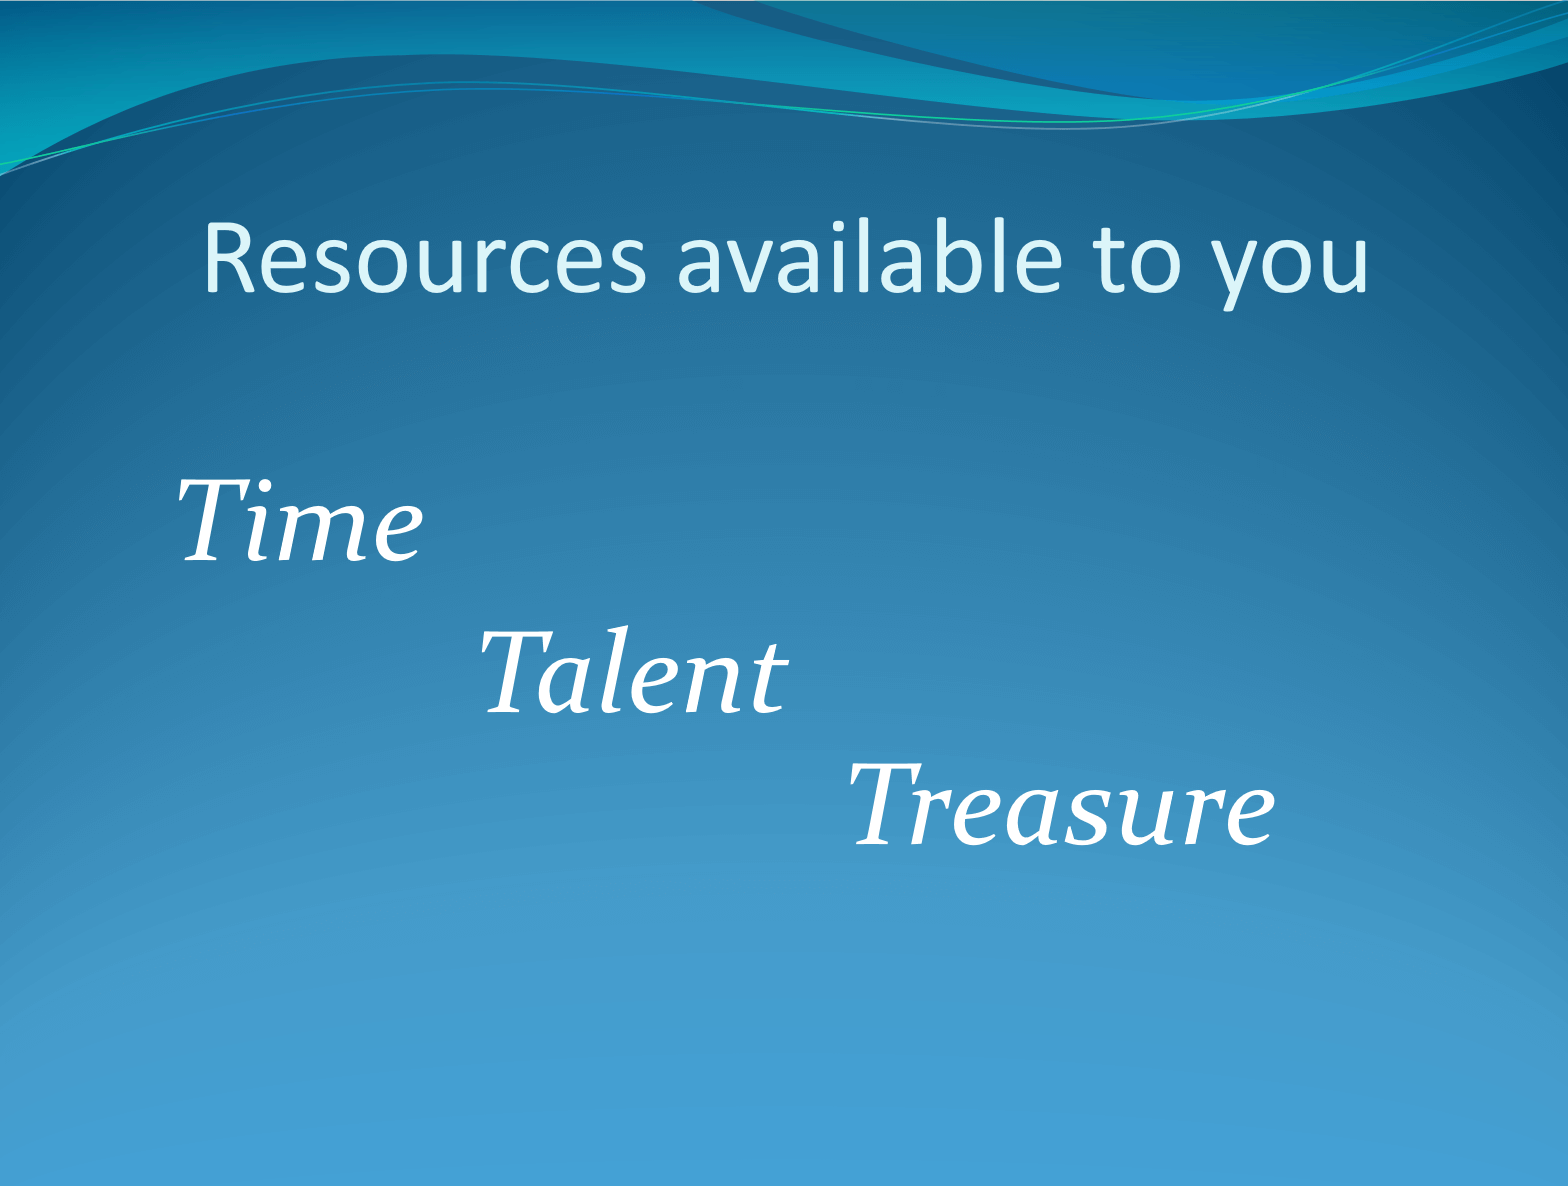 Bilal Qizilbash's 2017 Power of You Talk powerpoint slide featuring with text saying ''resources available to you'' as a title and the words time, talent and treasure.